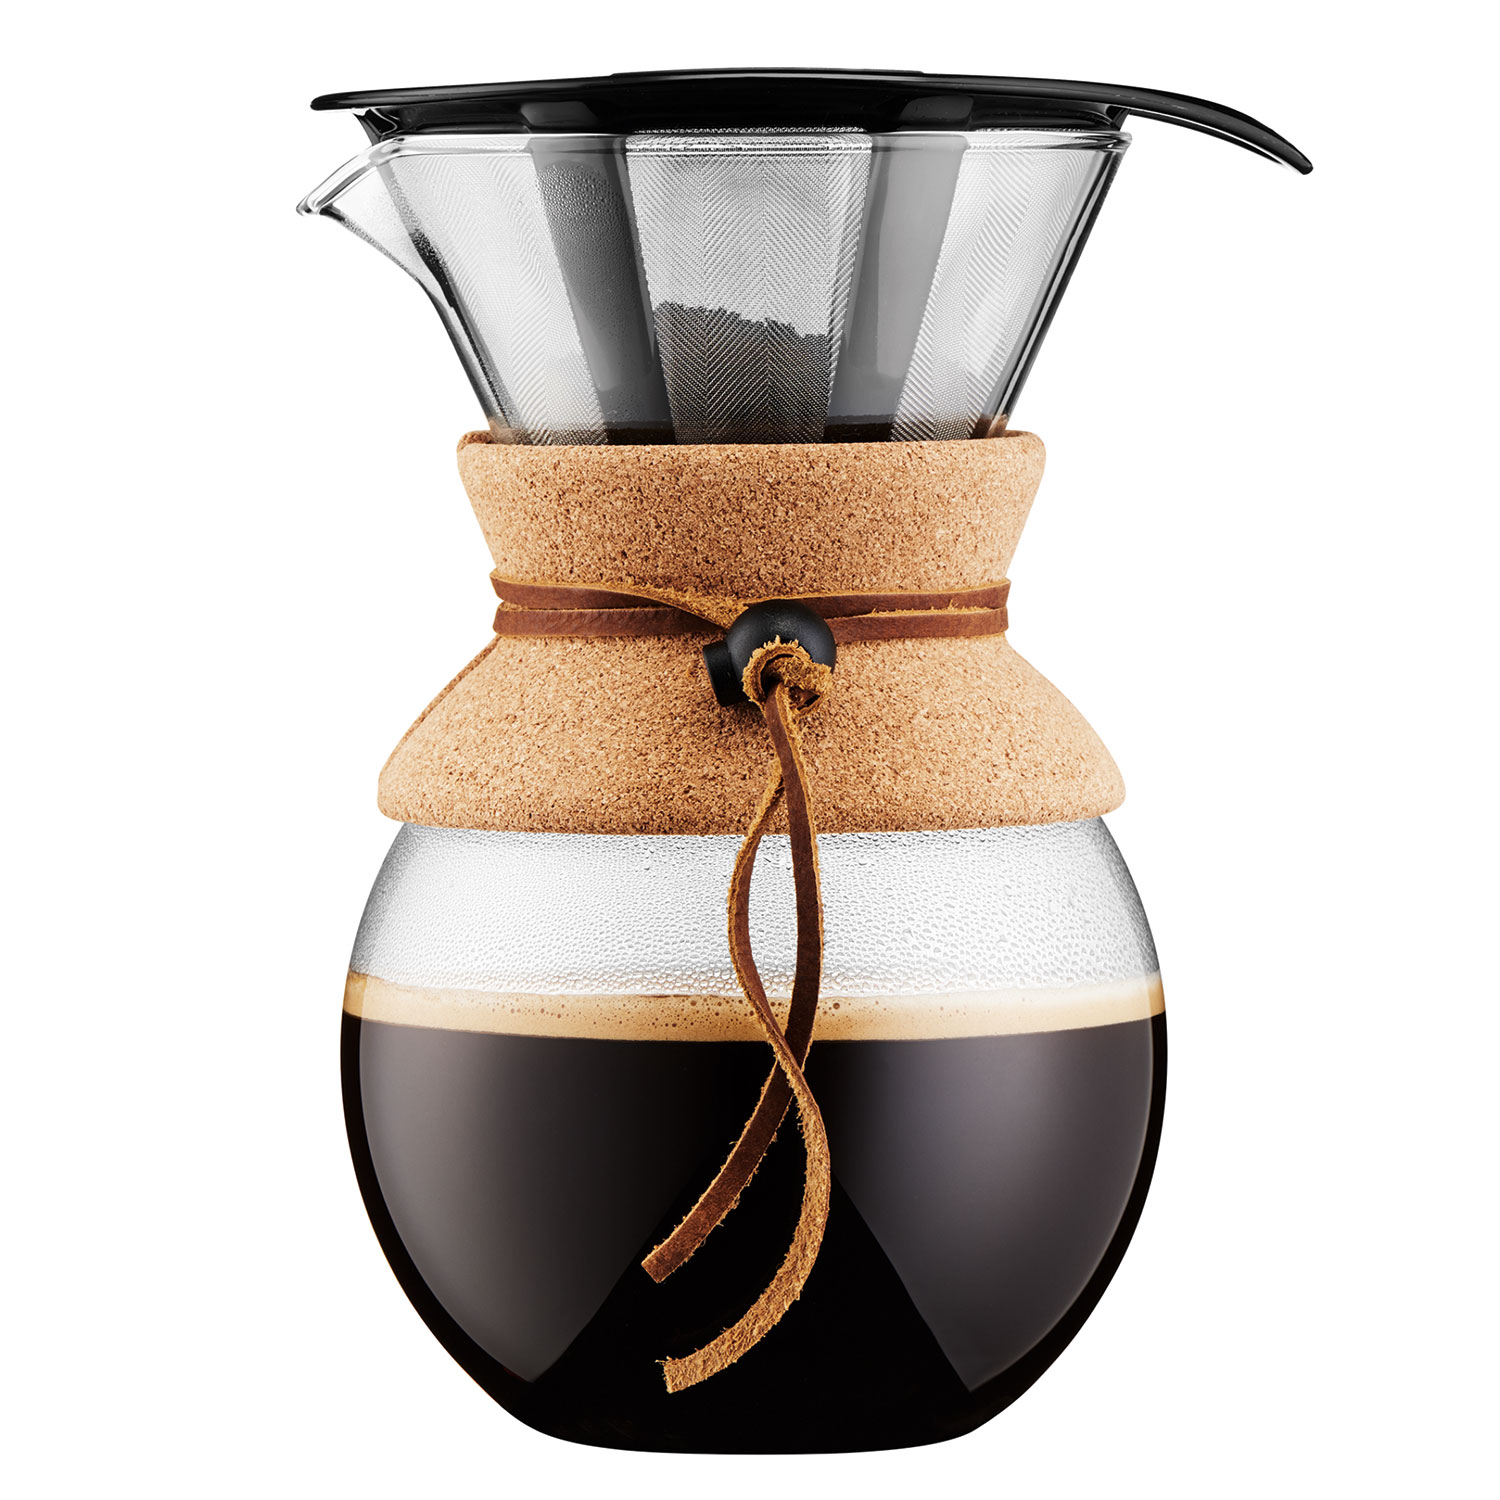 POUR OVER Kaffebryggare, 1 L